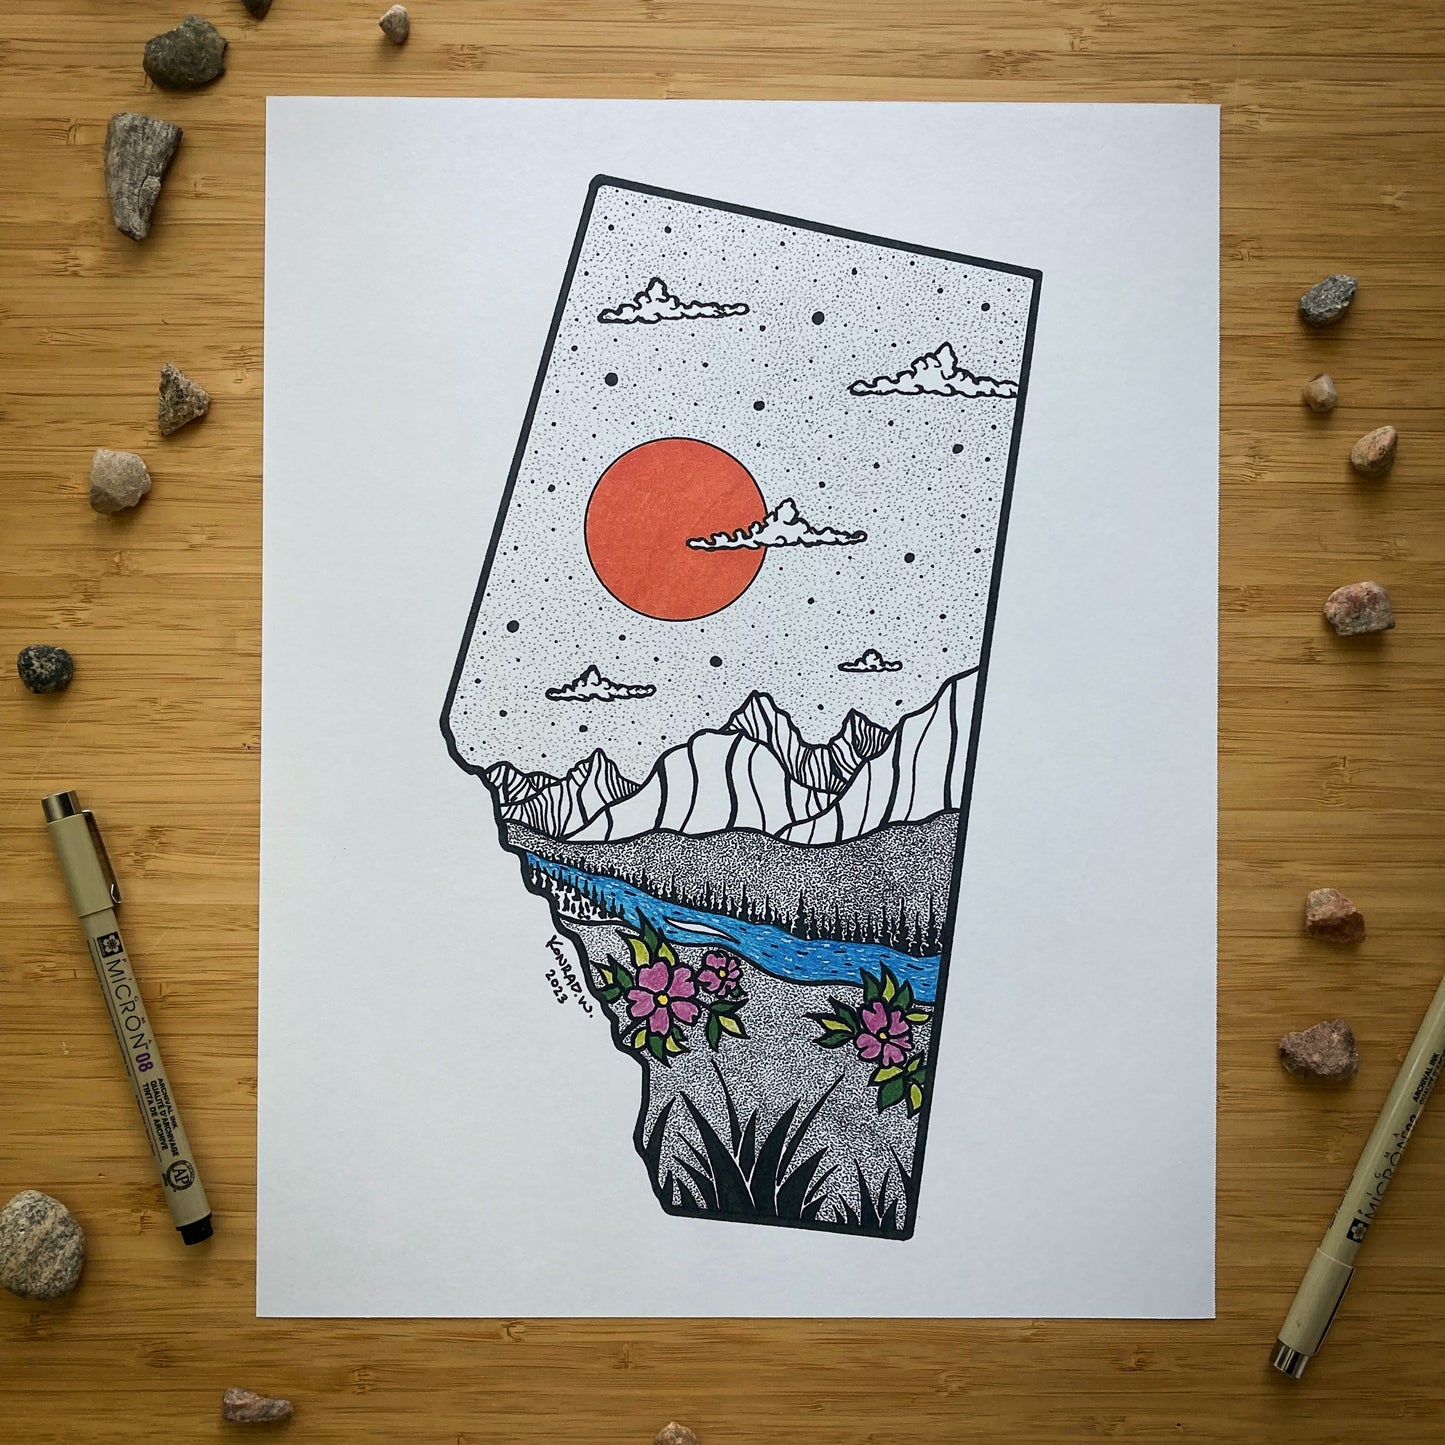 The Province of Alberta - Pen and Ink PRINT